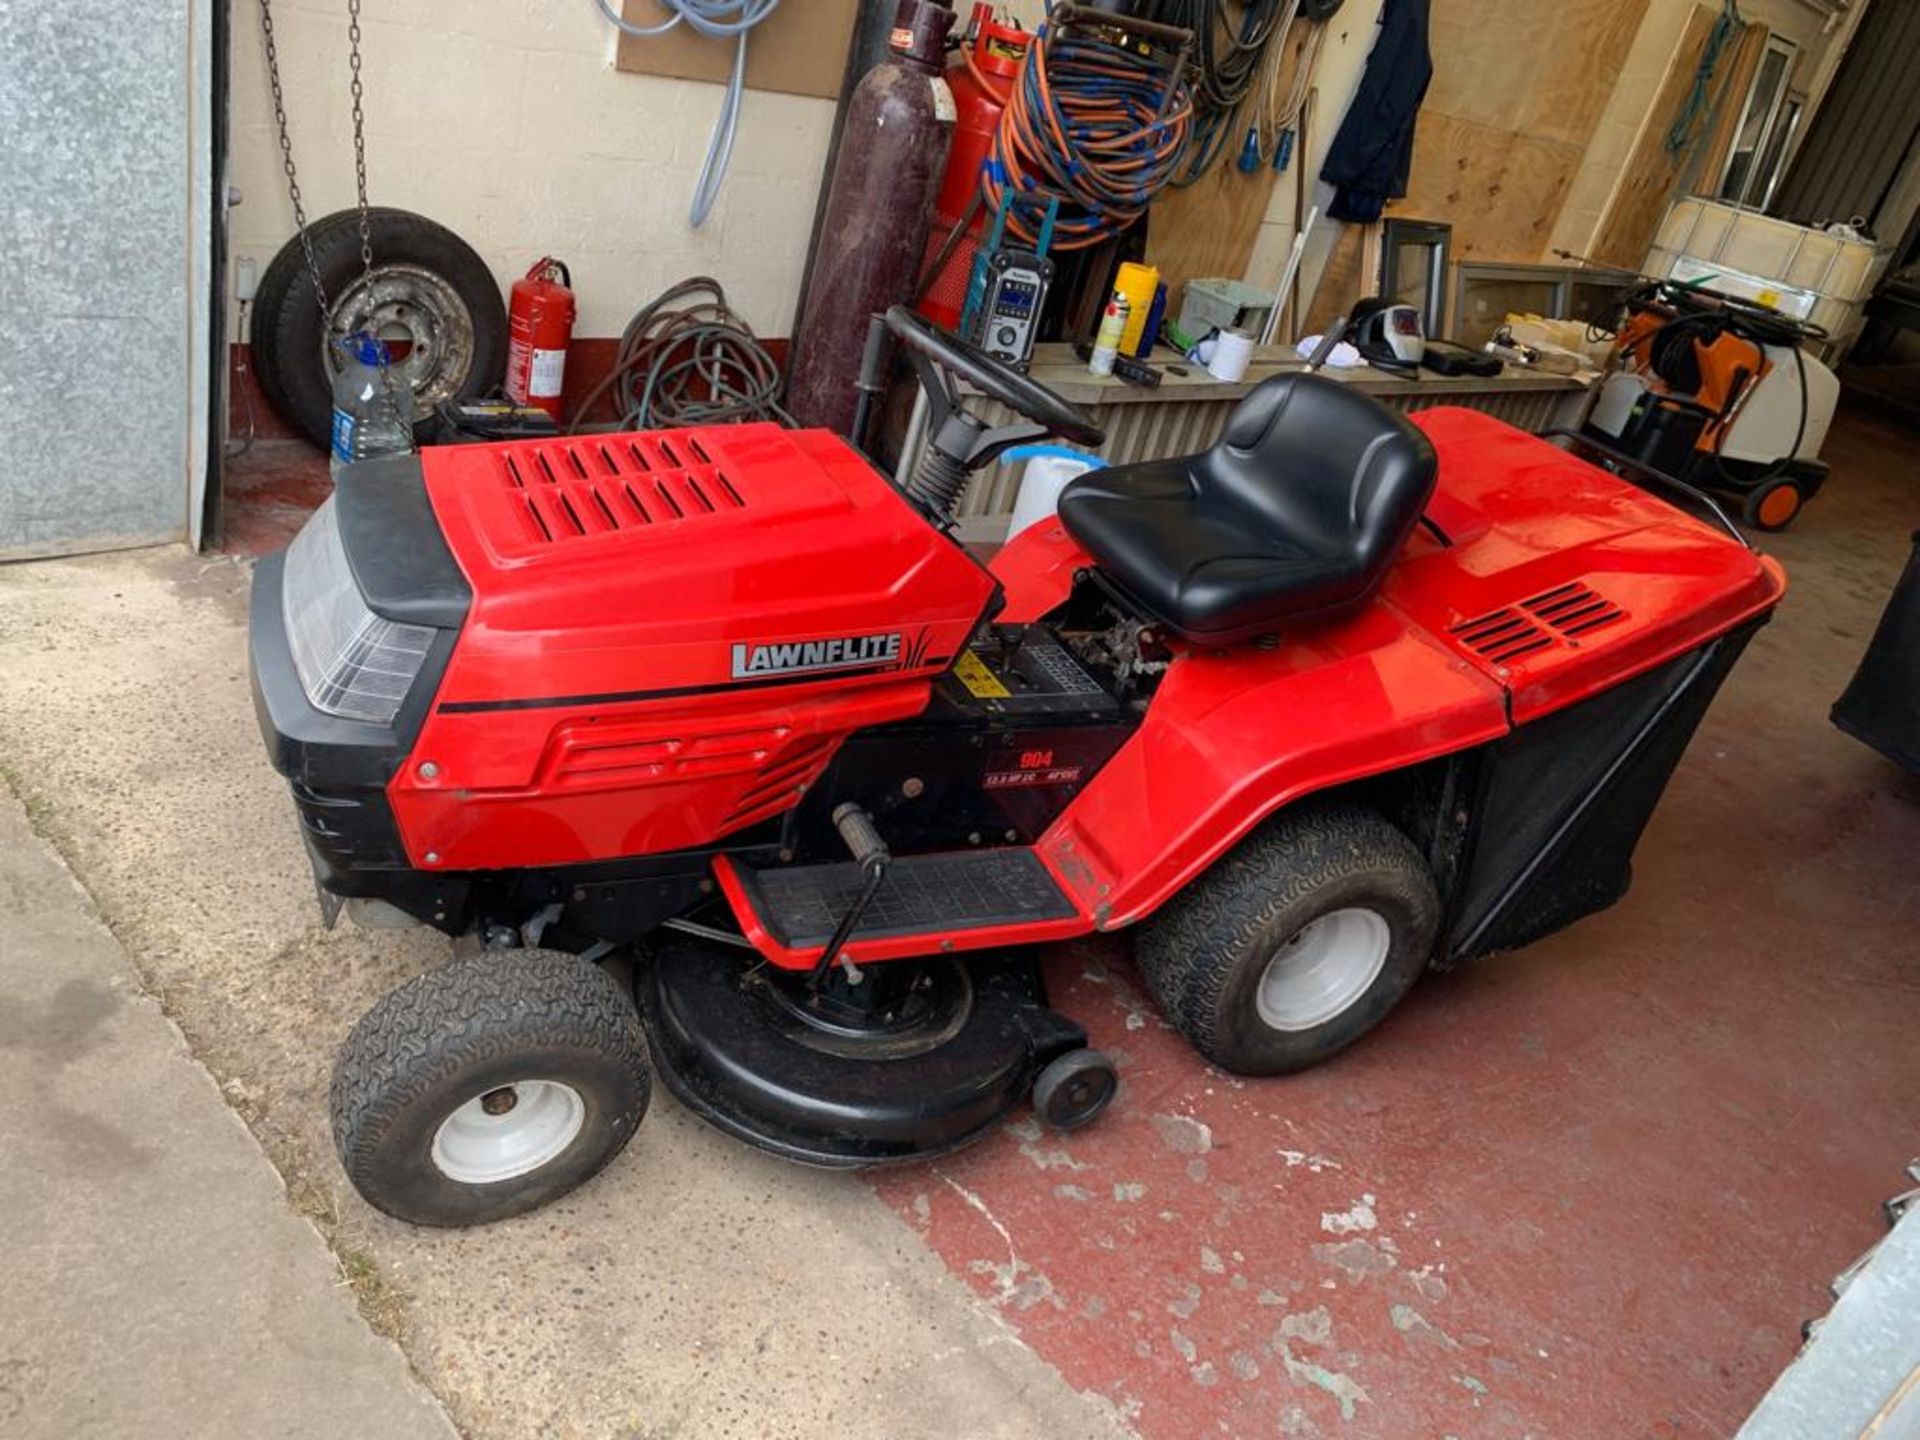 LAWNFLITE 904 RIDE ON LAWNMOWER 12.5HP I/C ENGINE, 40" CUTTING DECK, IN WORKING ORDER *NO VAT* - Image 2 of 7